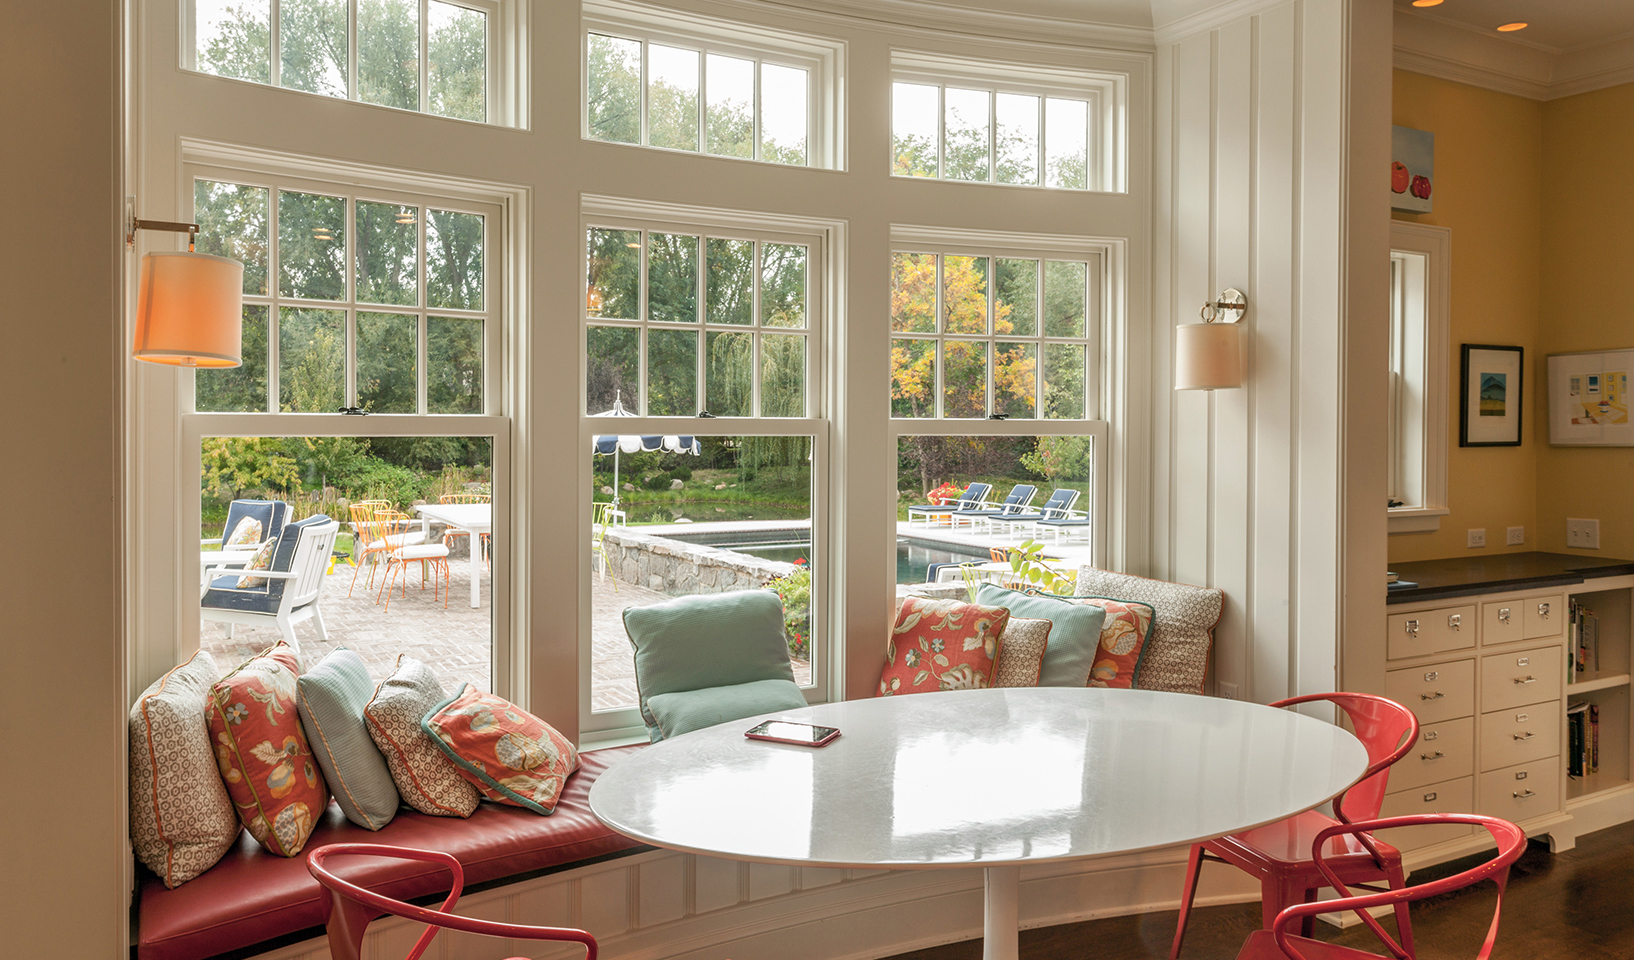 classical shingle style | interiors traditional | transitional kitchen | eating breakfast area nook | Cheerful floral | light | banquette | curved | window | seat | white | painted | vertical | paneling | upholstered | custom | round | pedestal | table | red | ES-LO Design Studio | San Francisco